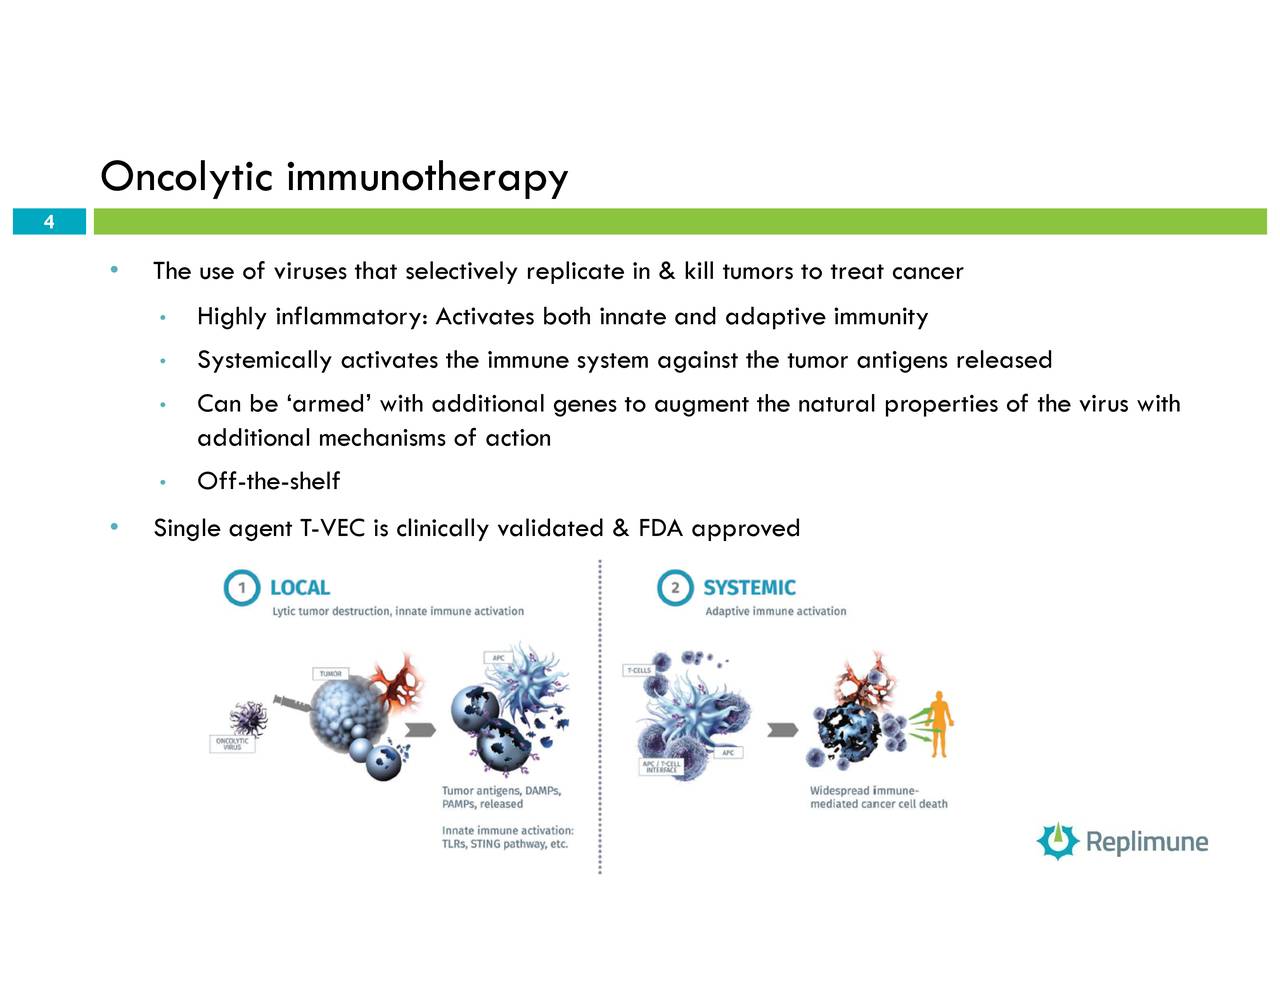 Oncolytic immunotherapy